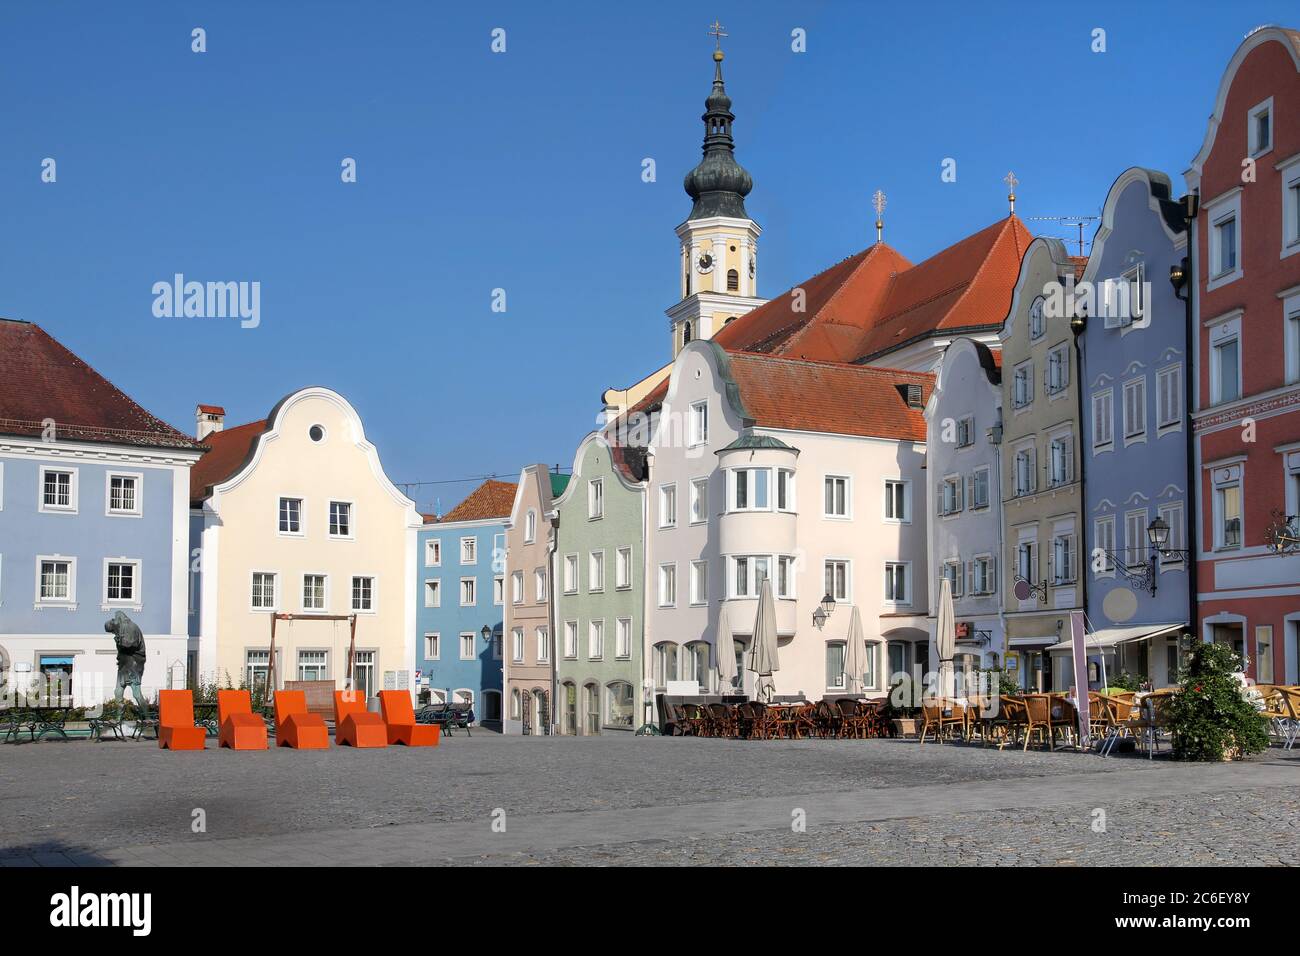 Stadtplatz (town square) in Scharding, Austria, a charming town in Upper Austria and a historical port on the Inn River Stock Photo